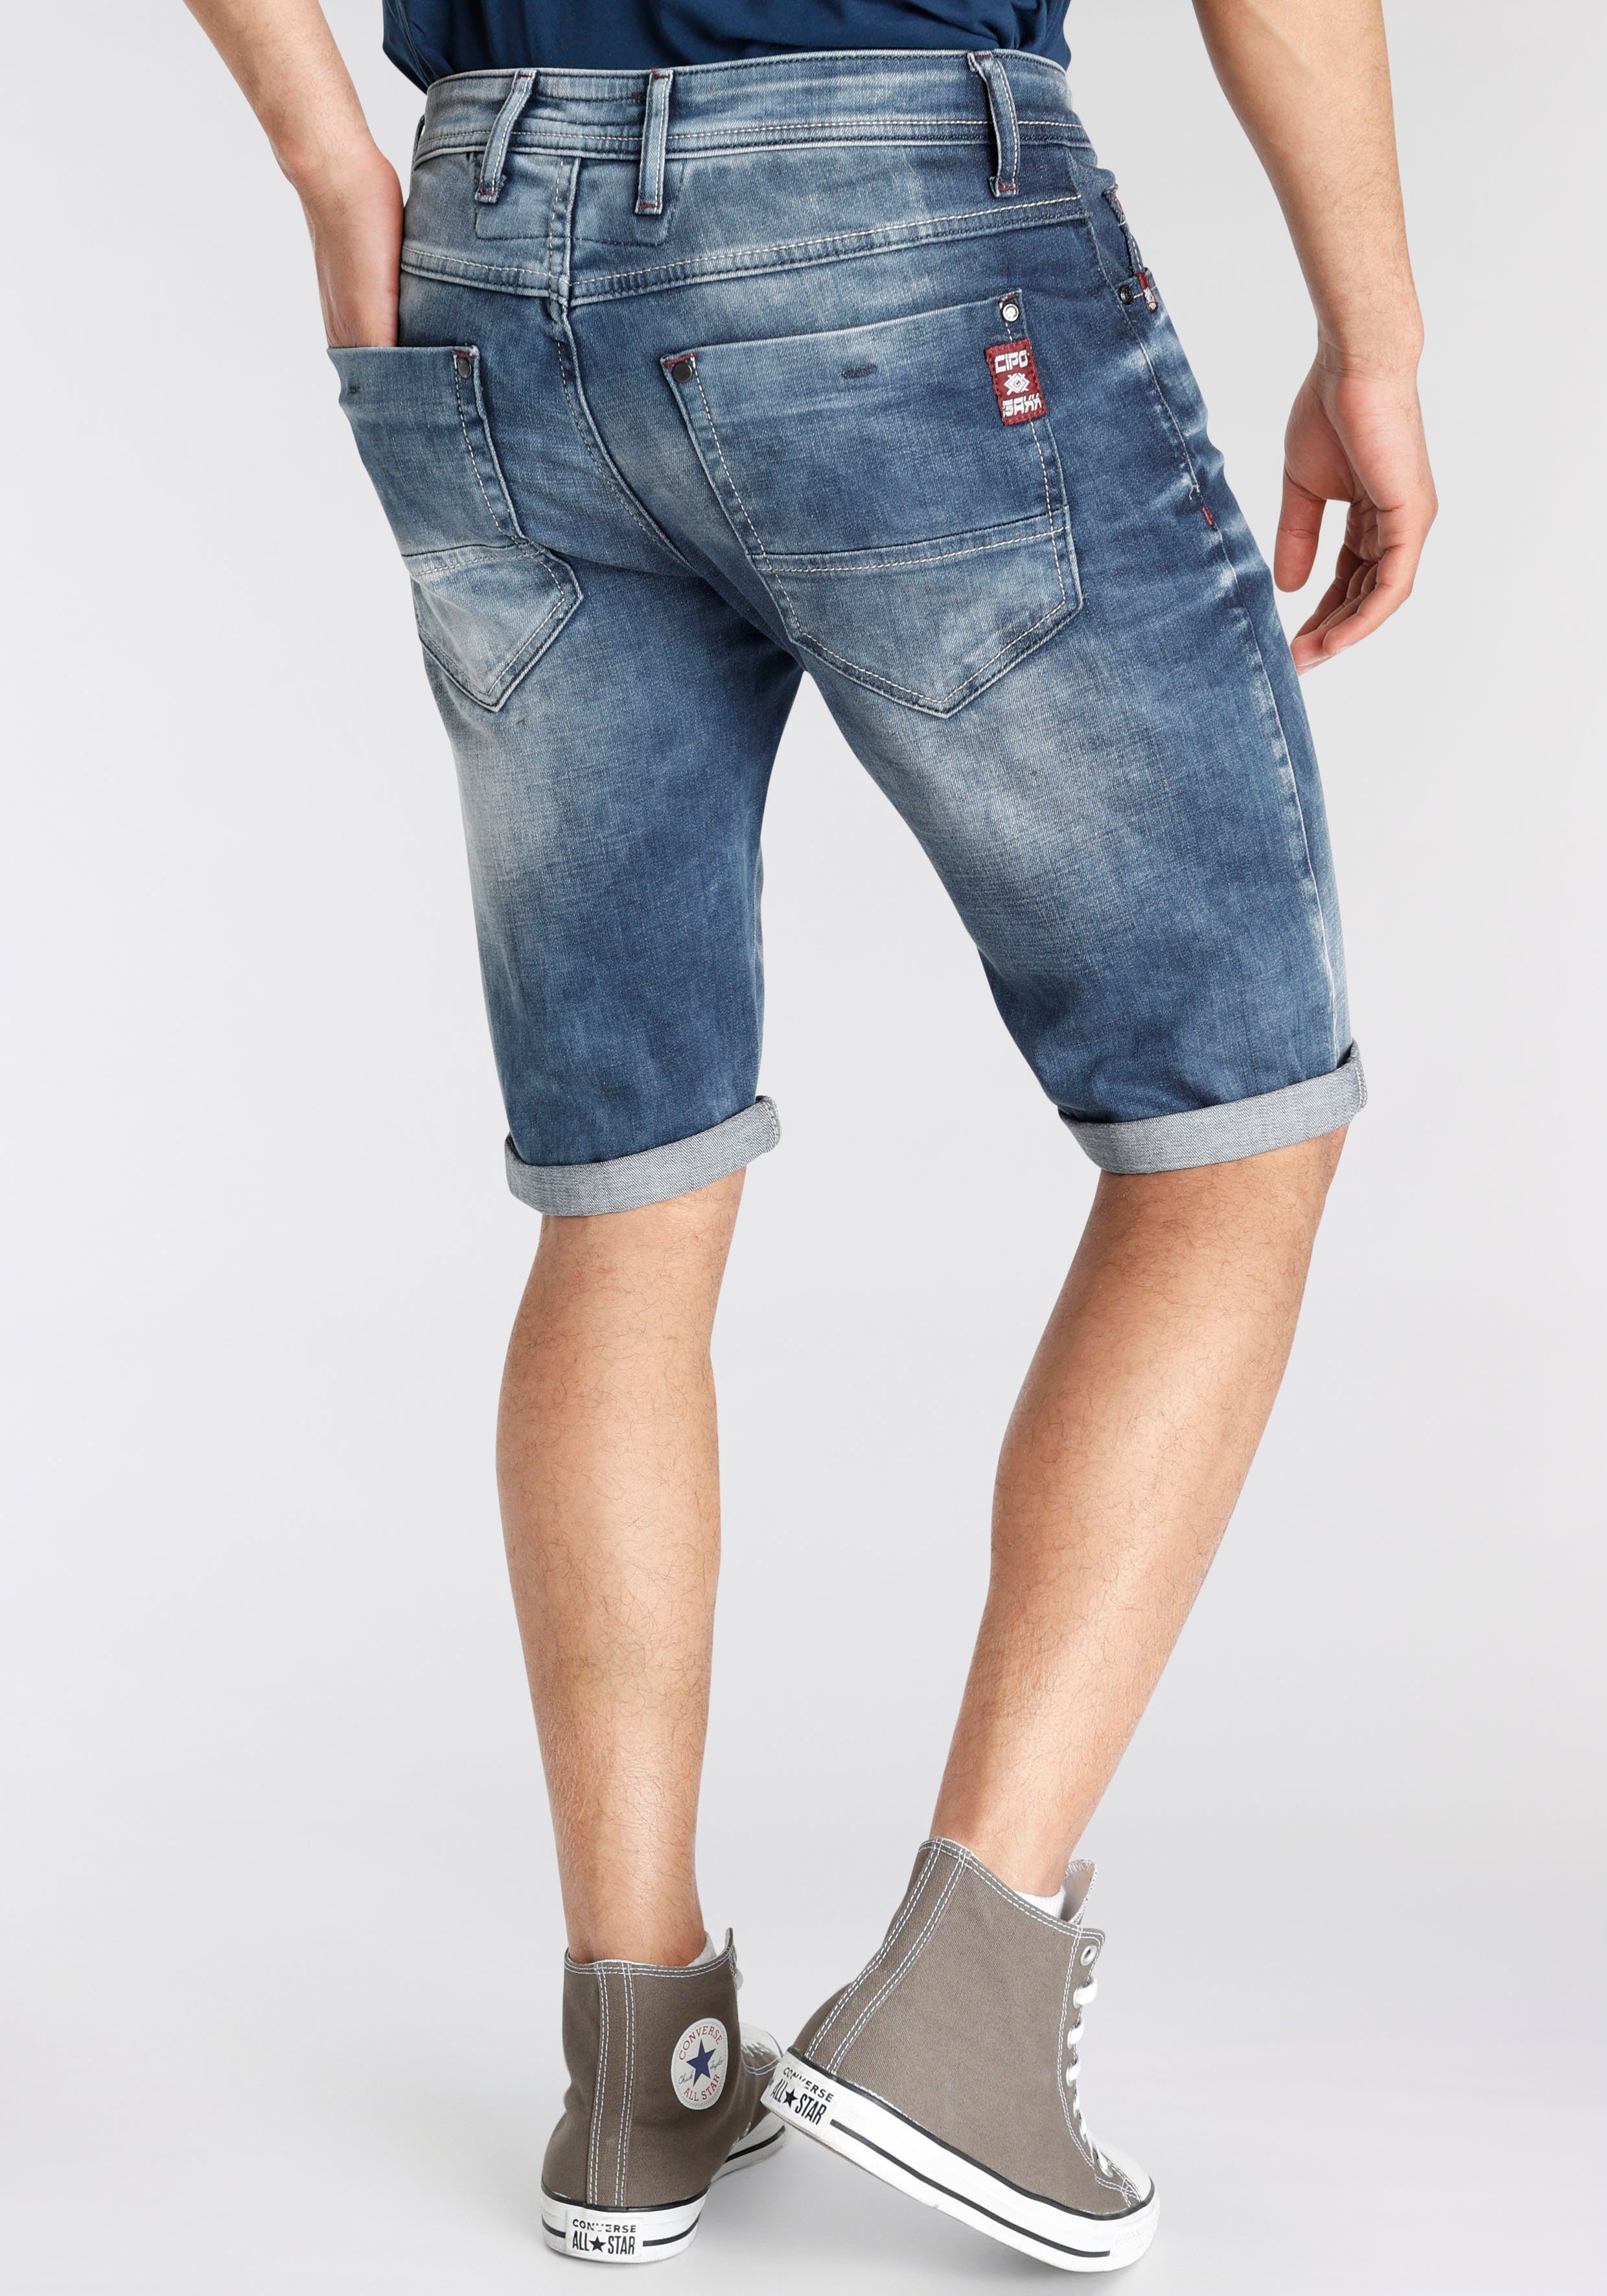 Cipo & Baxx Jeansshorts blue used